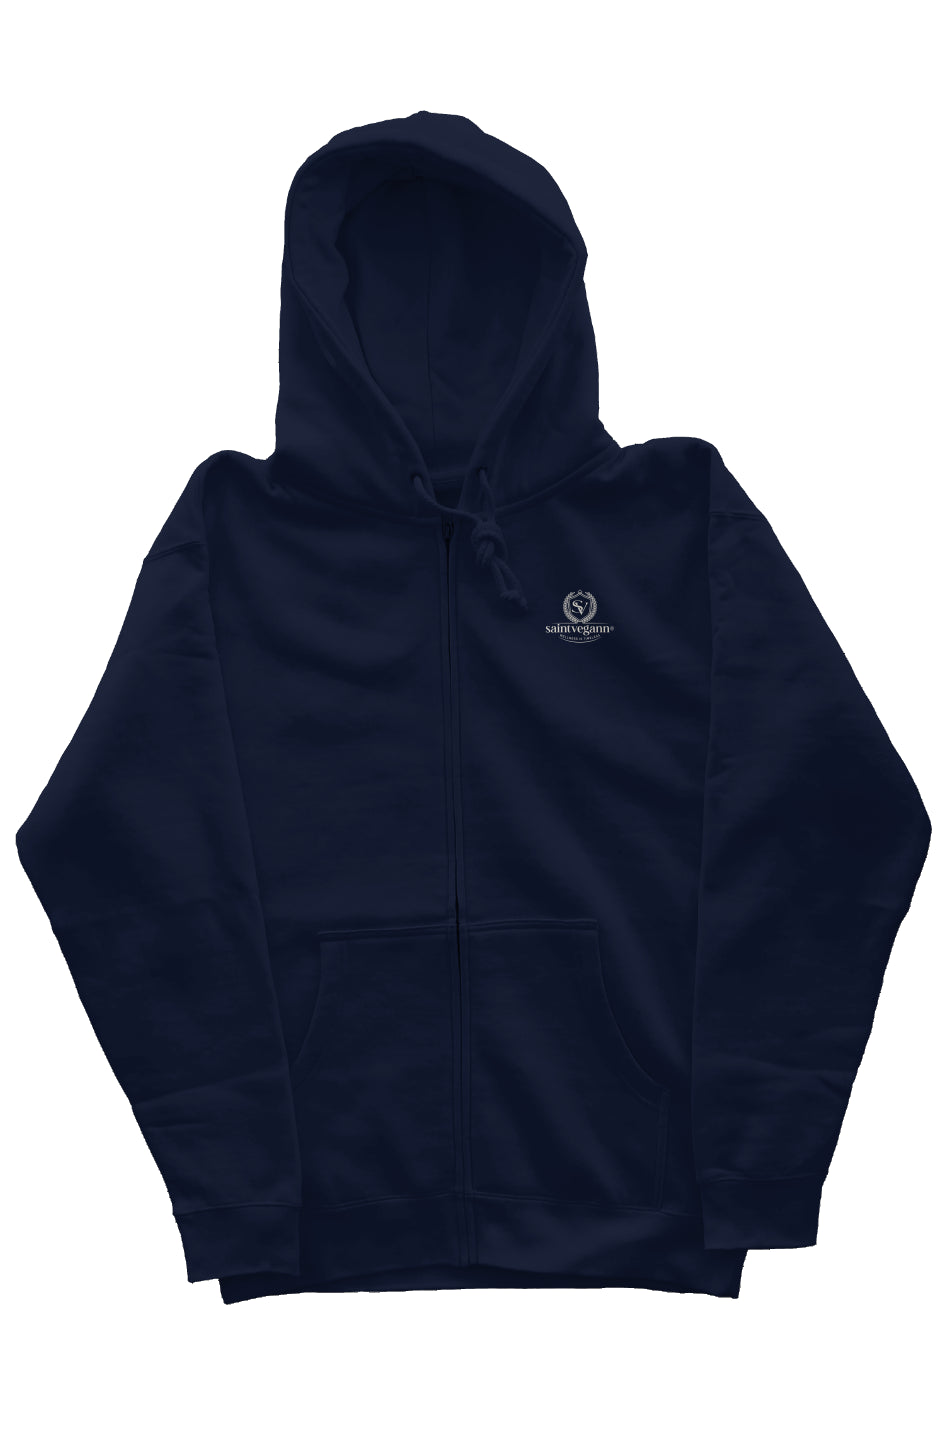 the new leaf full zip in new england navy